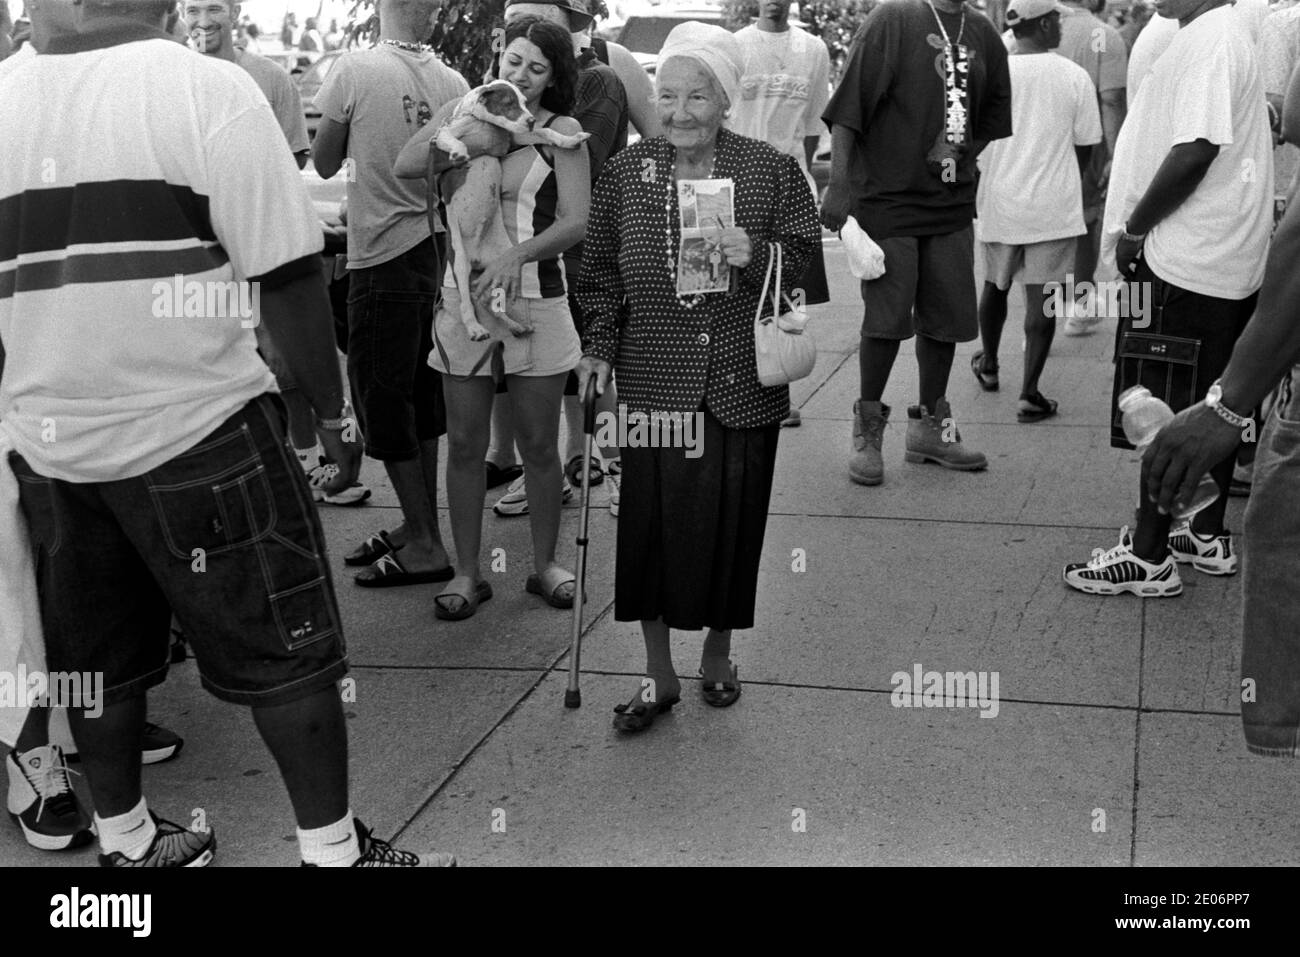 South Beach Ocean Drive, Miami Florida USA 1990s. An older senior woman with walking stick amongst a crowd of young African American men hanging out 1999 USA HOMER SYKES Stock Photo